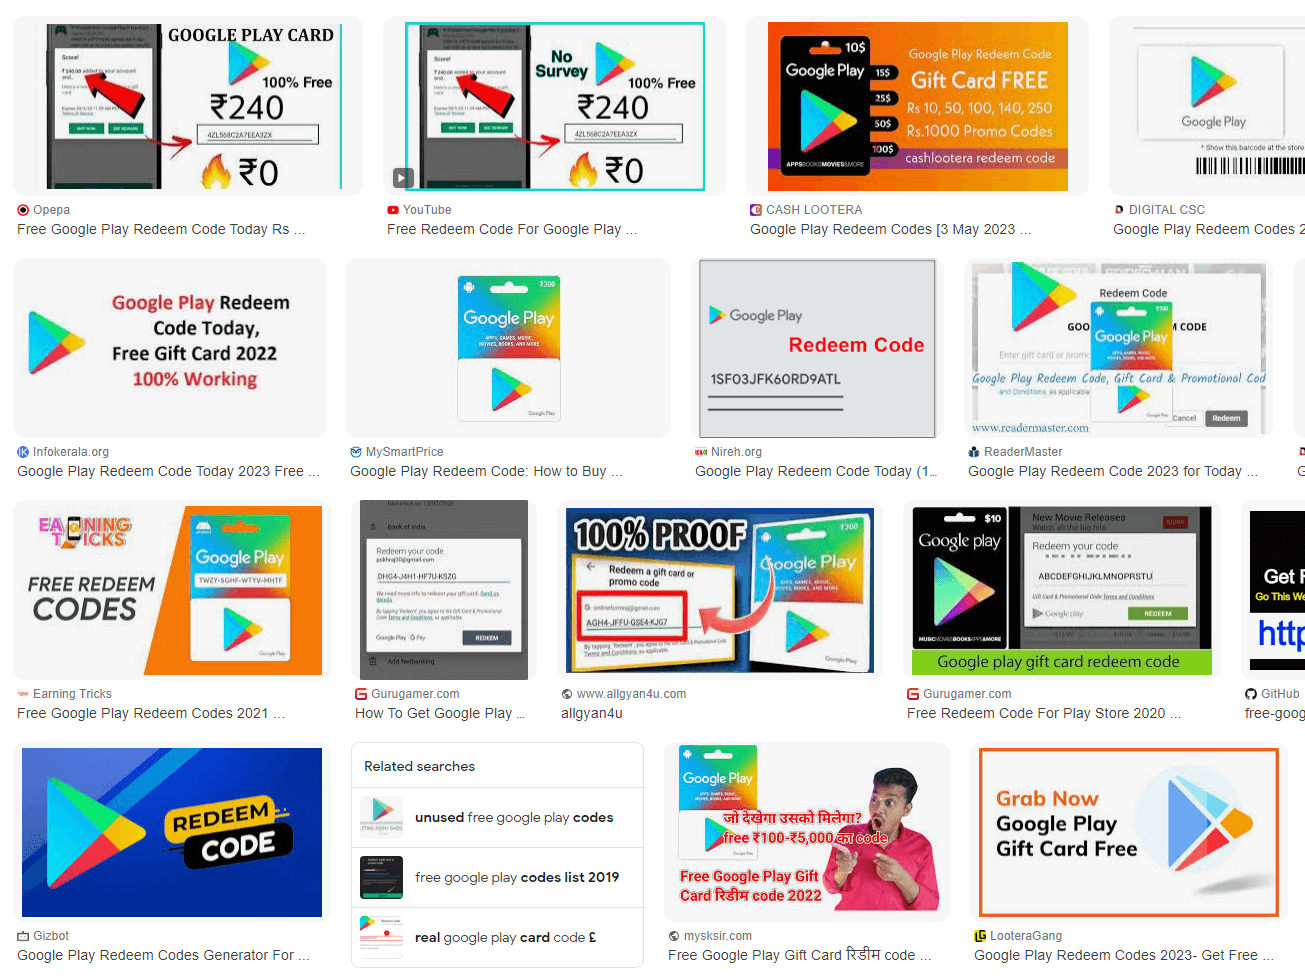 15€ Google Play Gift Card. FREE SHIP GENUINE!!!! best seller *SHIPS TODAY